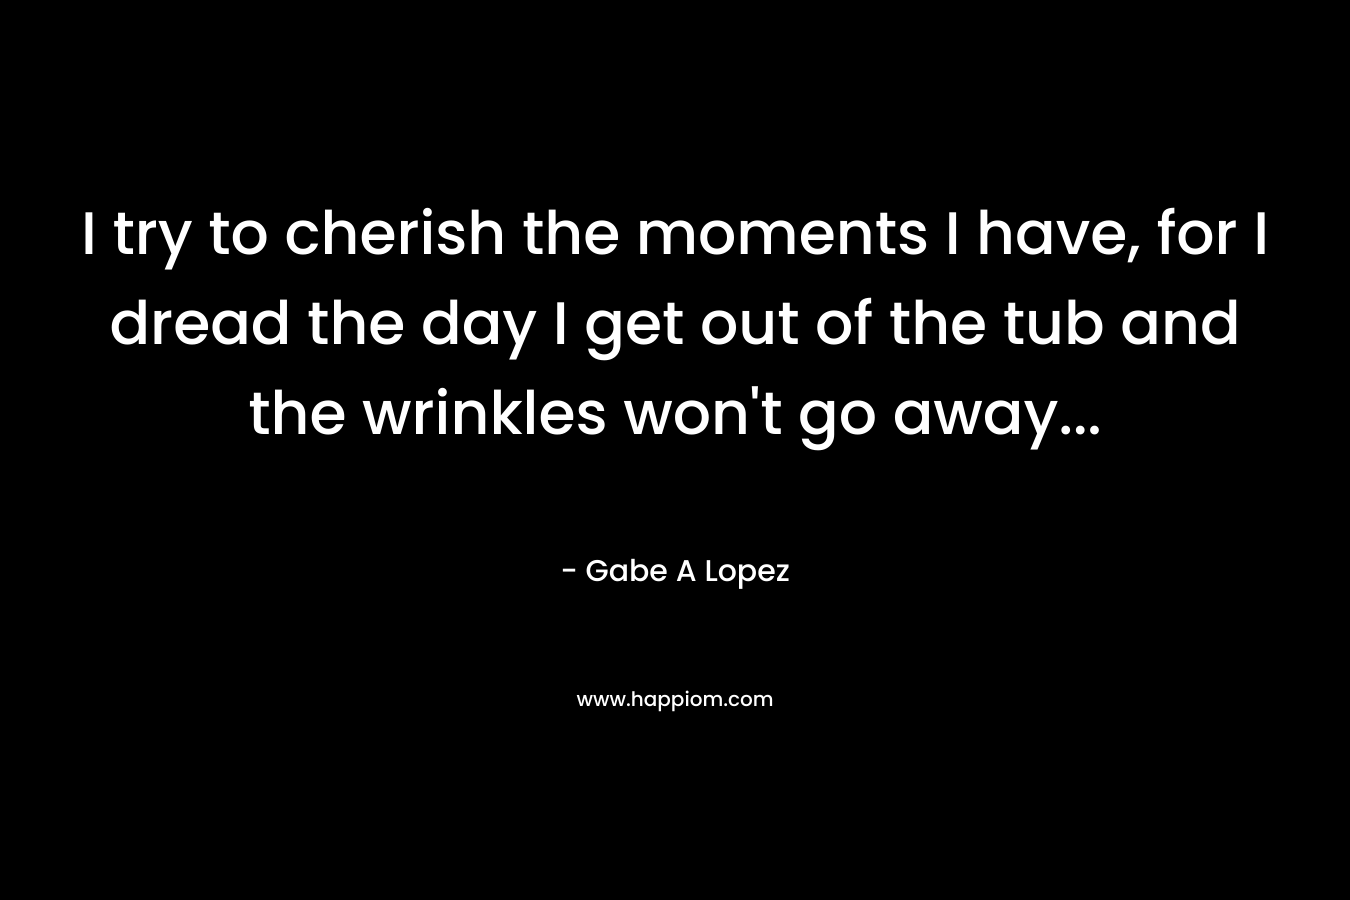 I try to cherish the moments I have, for I dread the day I get out of the tub and the wrinkles won't go away...